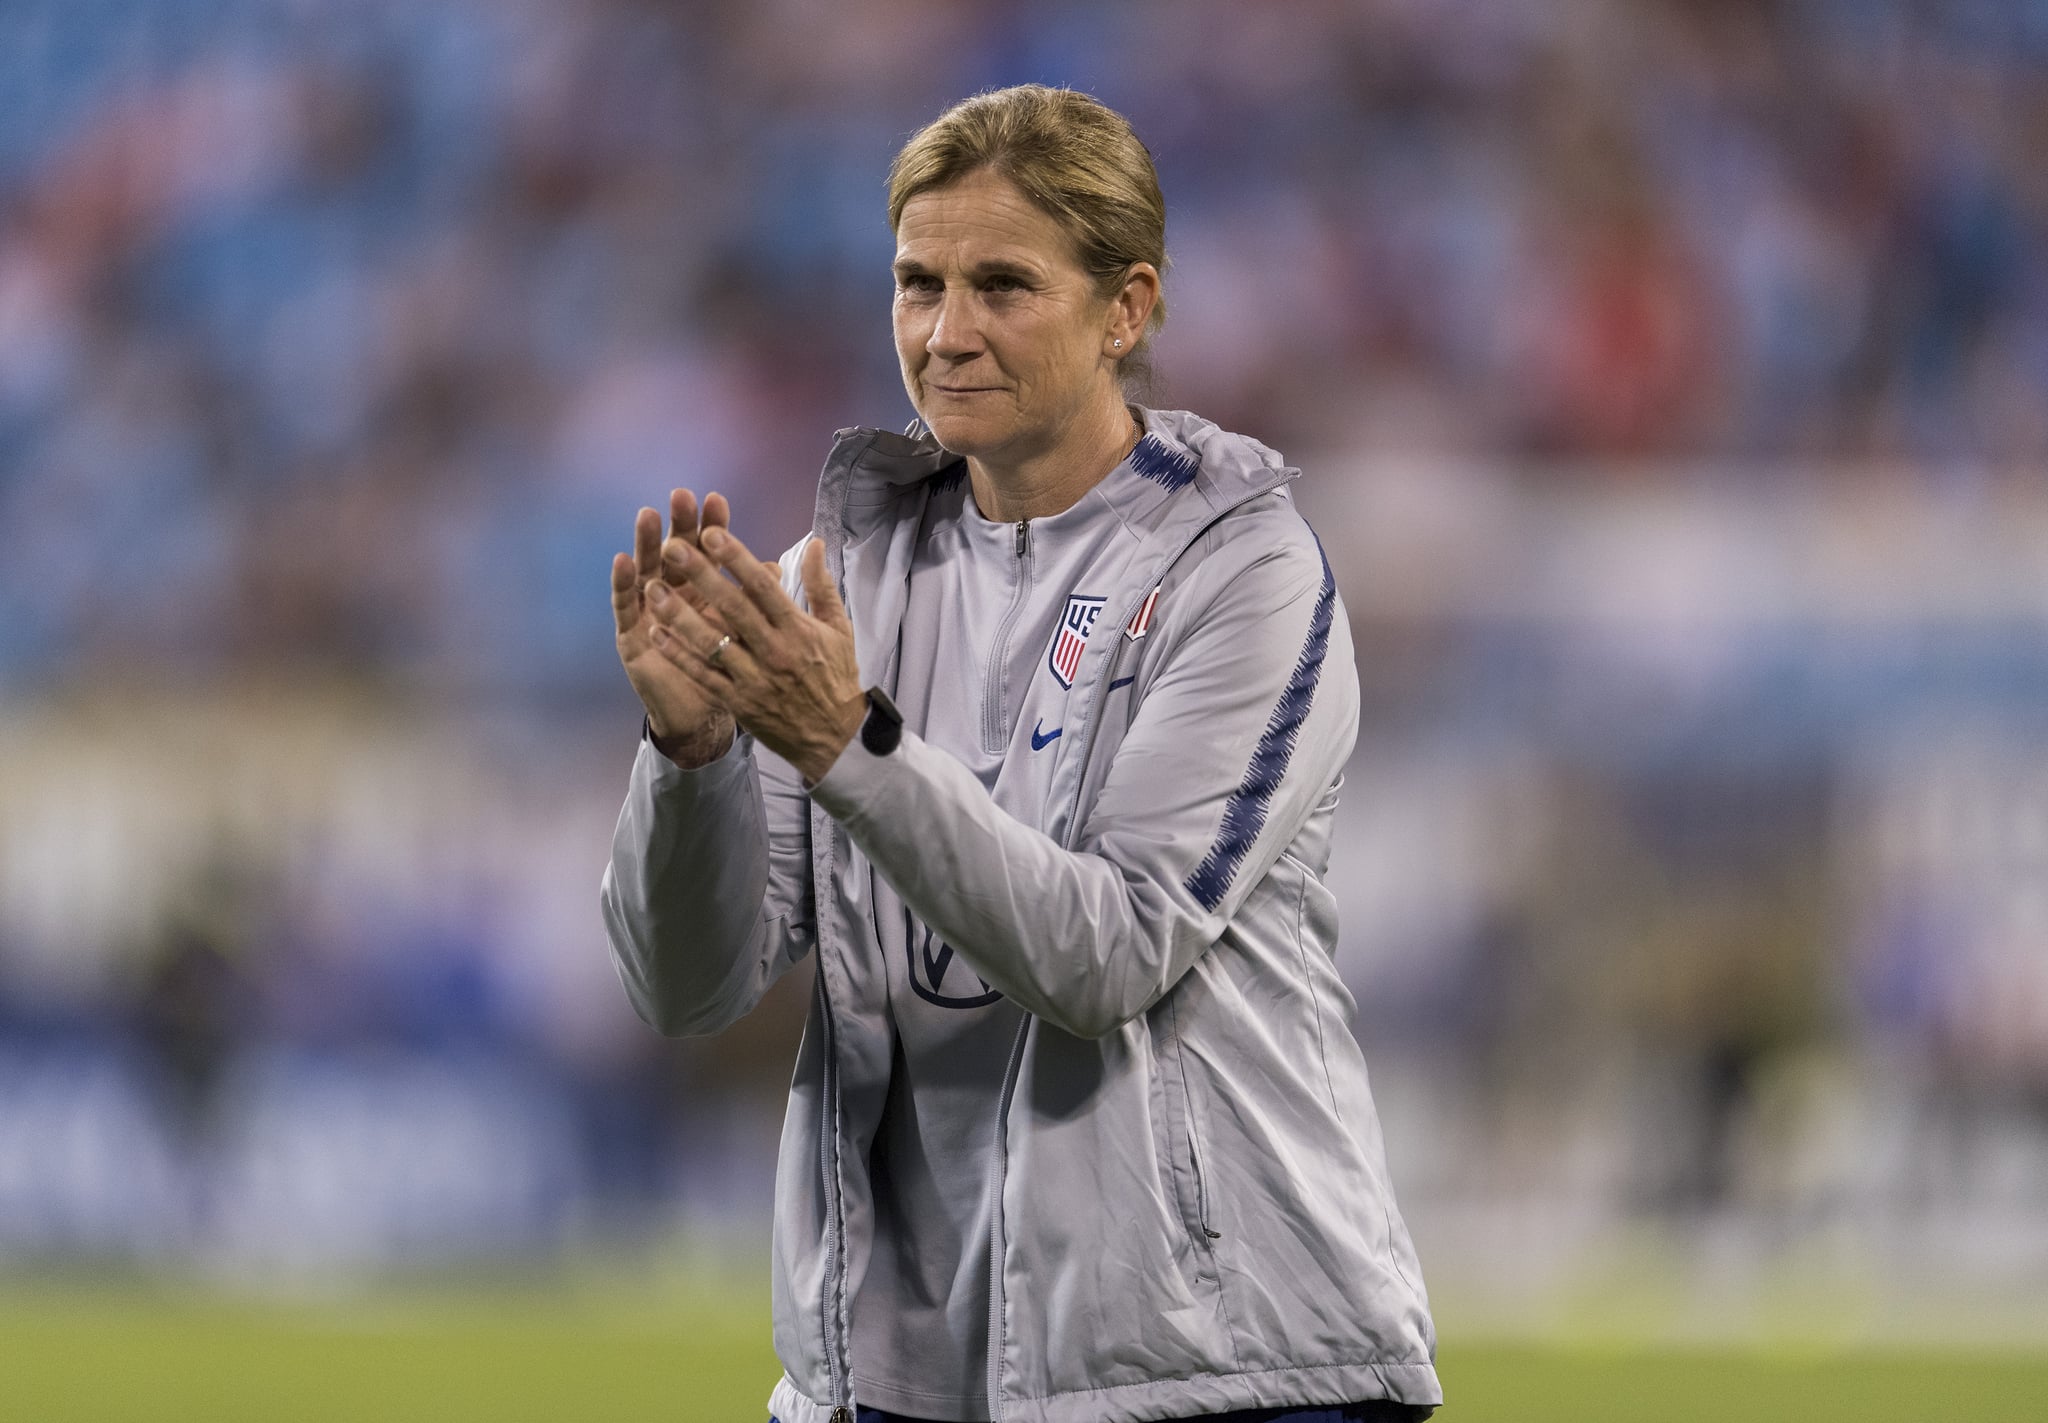 CHARLOTTE, NC - OCTOBER 03: Jill Ellis of the United States watches her team during a game between Korea Republic and USWNT at Bank of America Stadium on October 3, 2019 in Charlotte, North Carolina. (Photo by Brad Smith/ISI Photos/Getty Images).